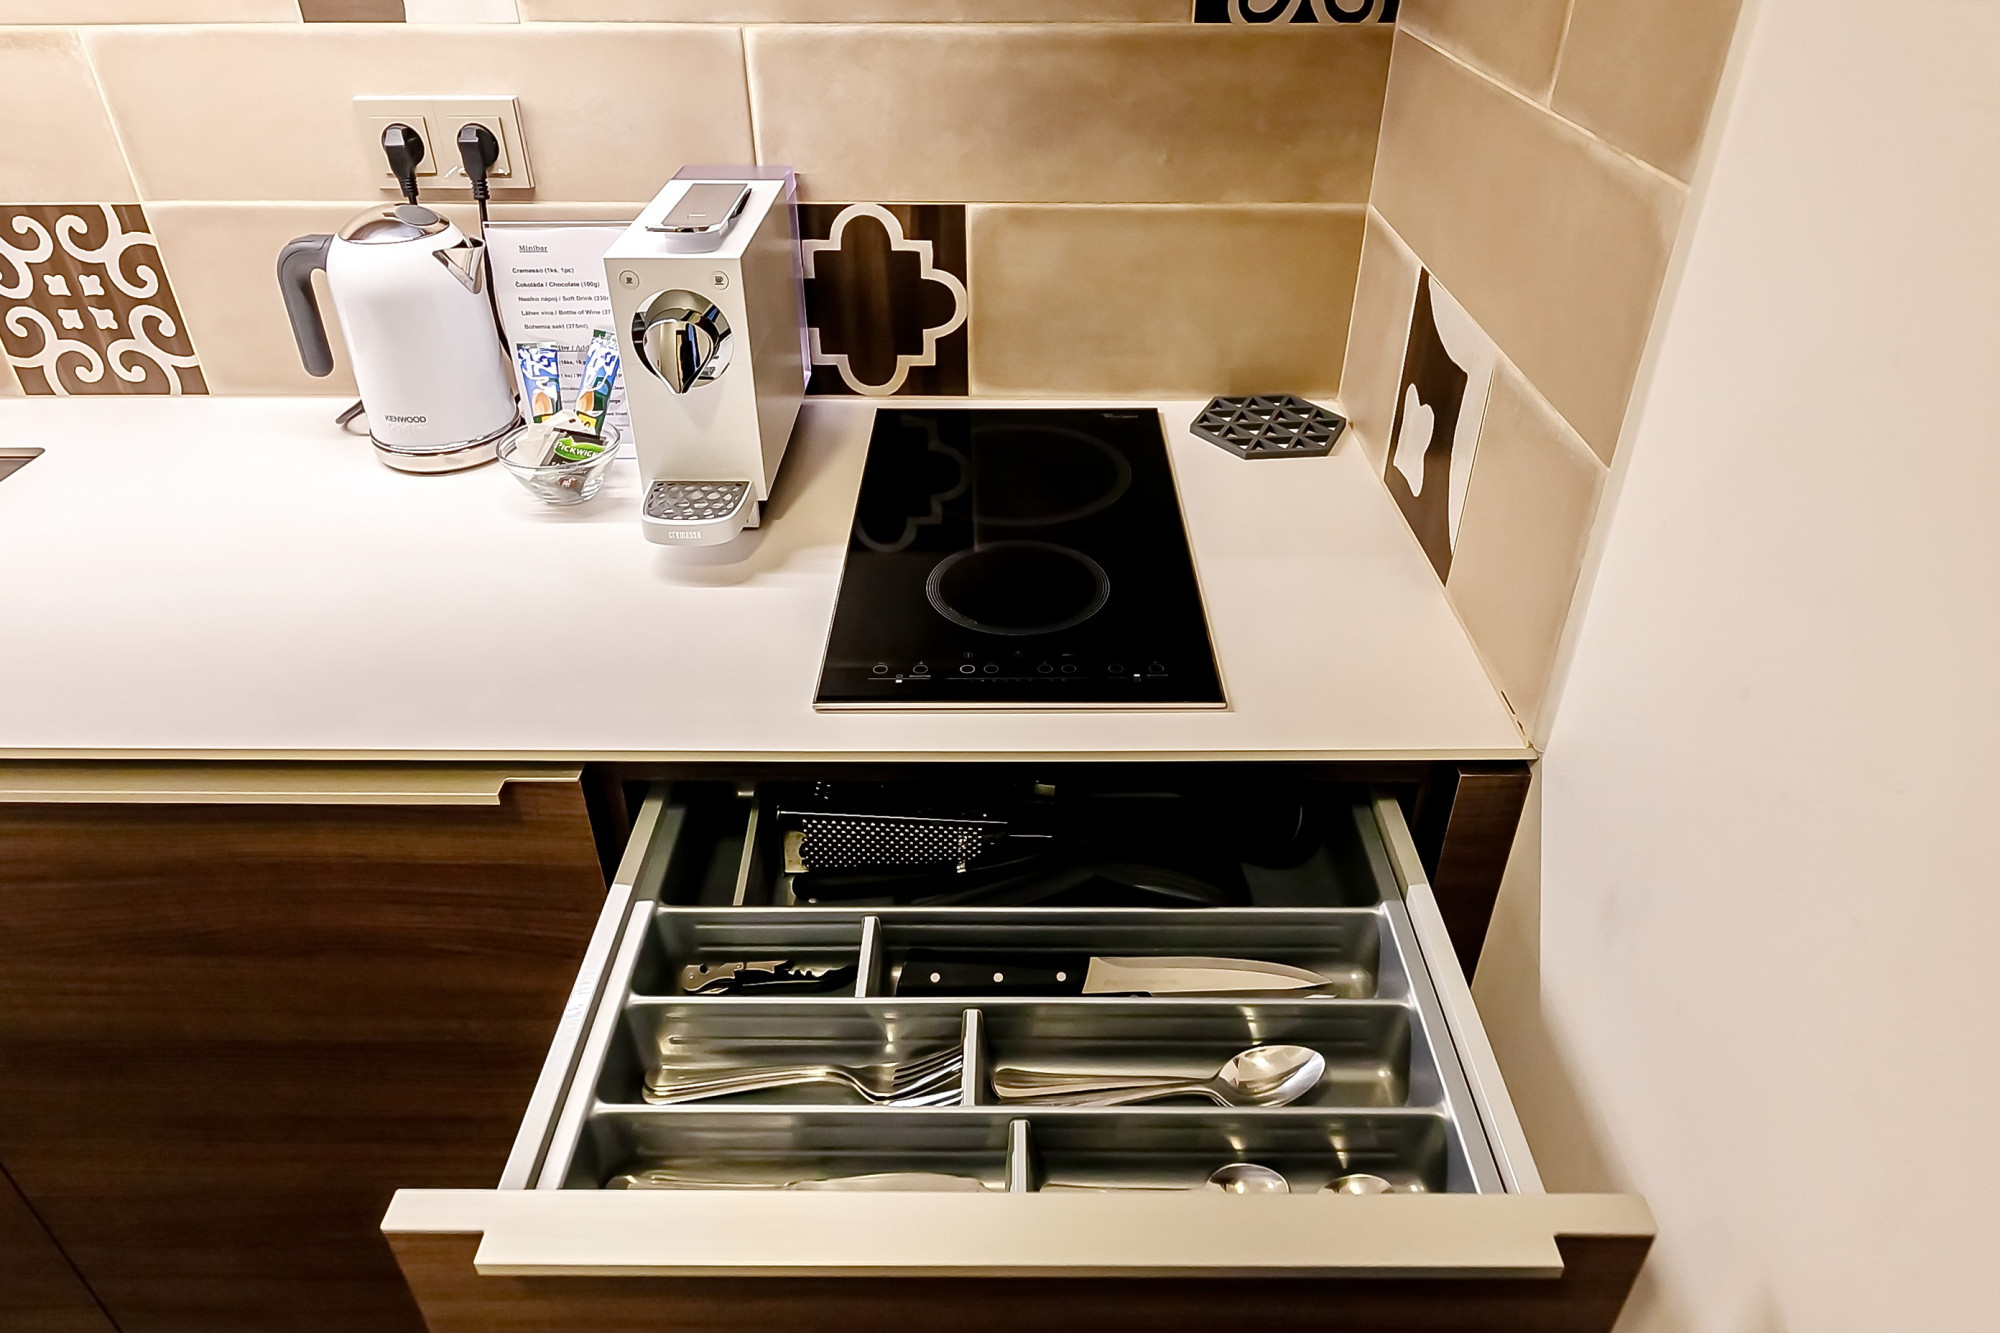 Fully equipped kitchen with sink, microwave, and toaster at Aparthotel Vinohradský dům Prague Studio Deluxe Suite.